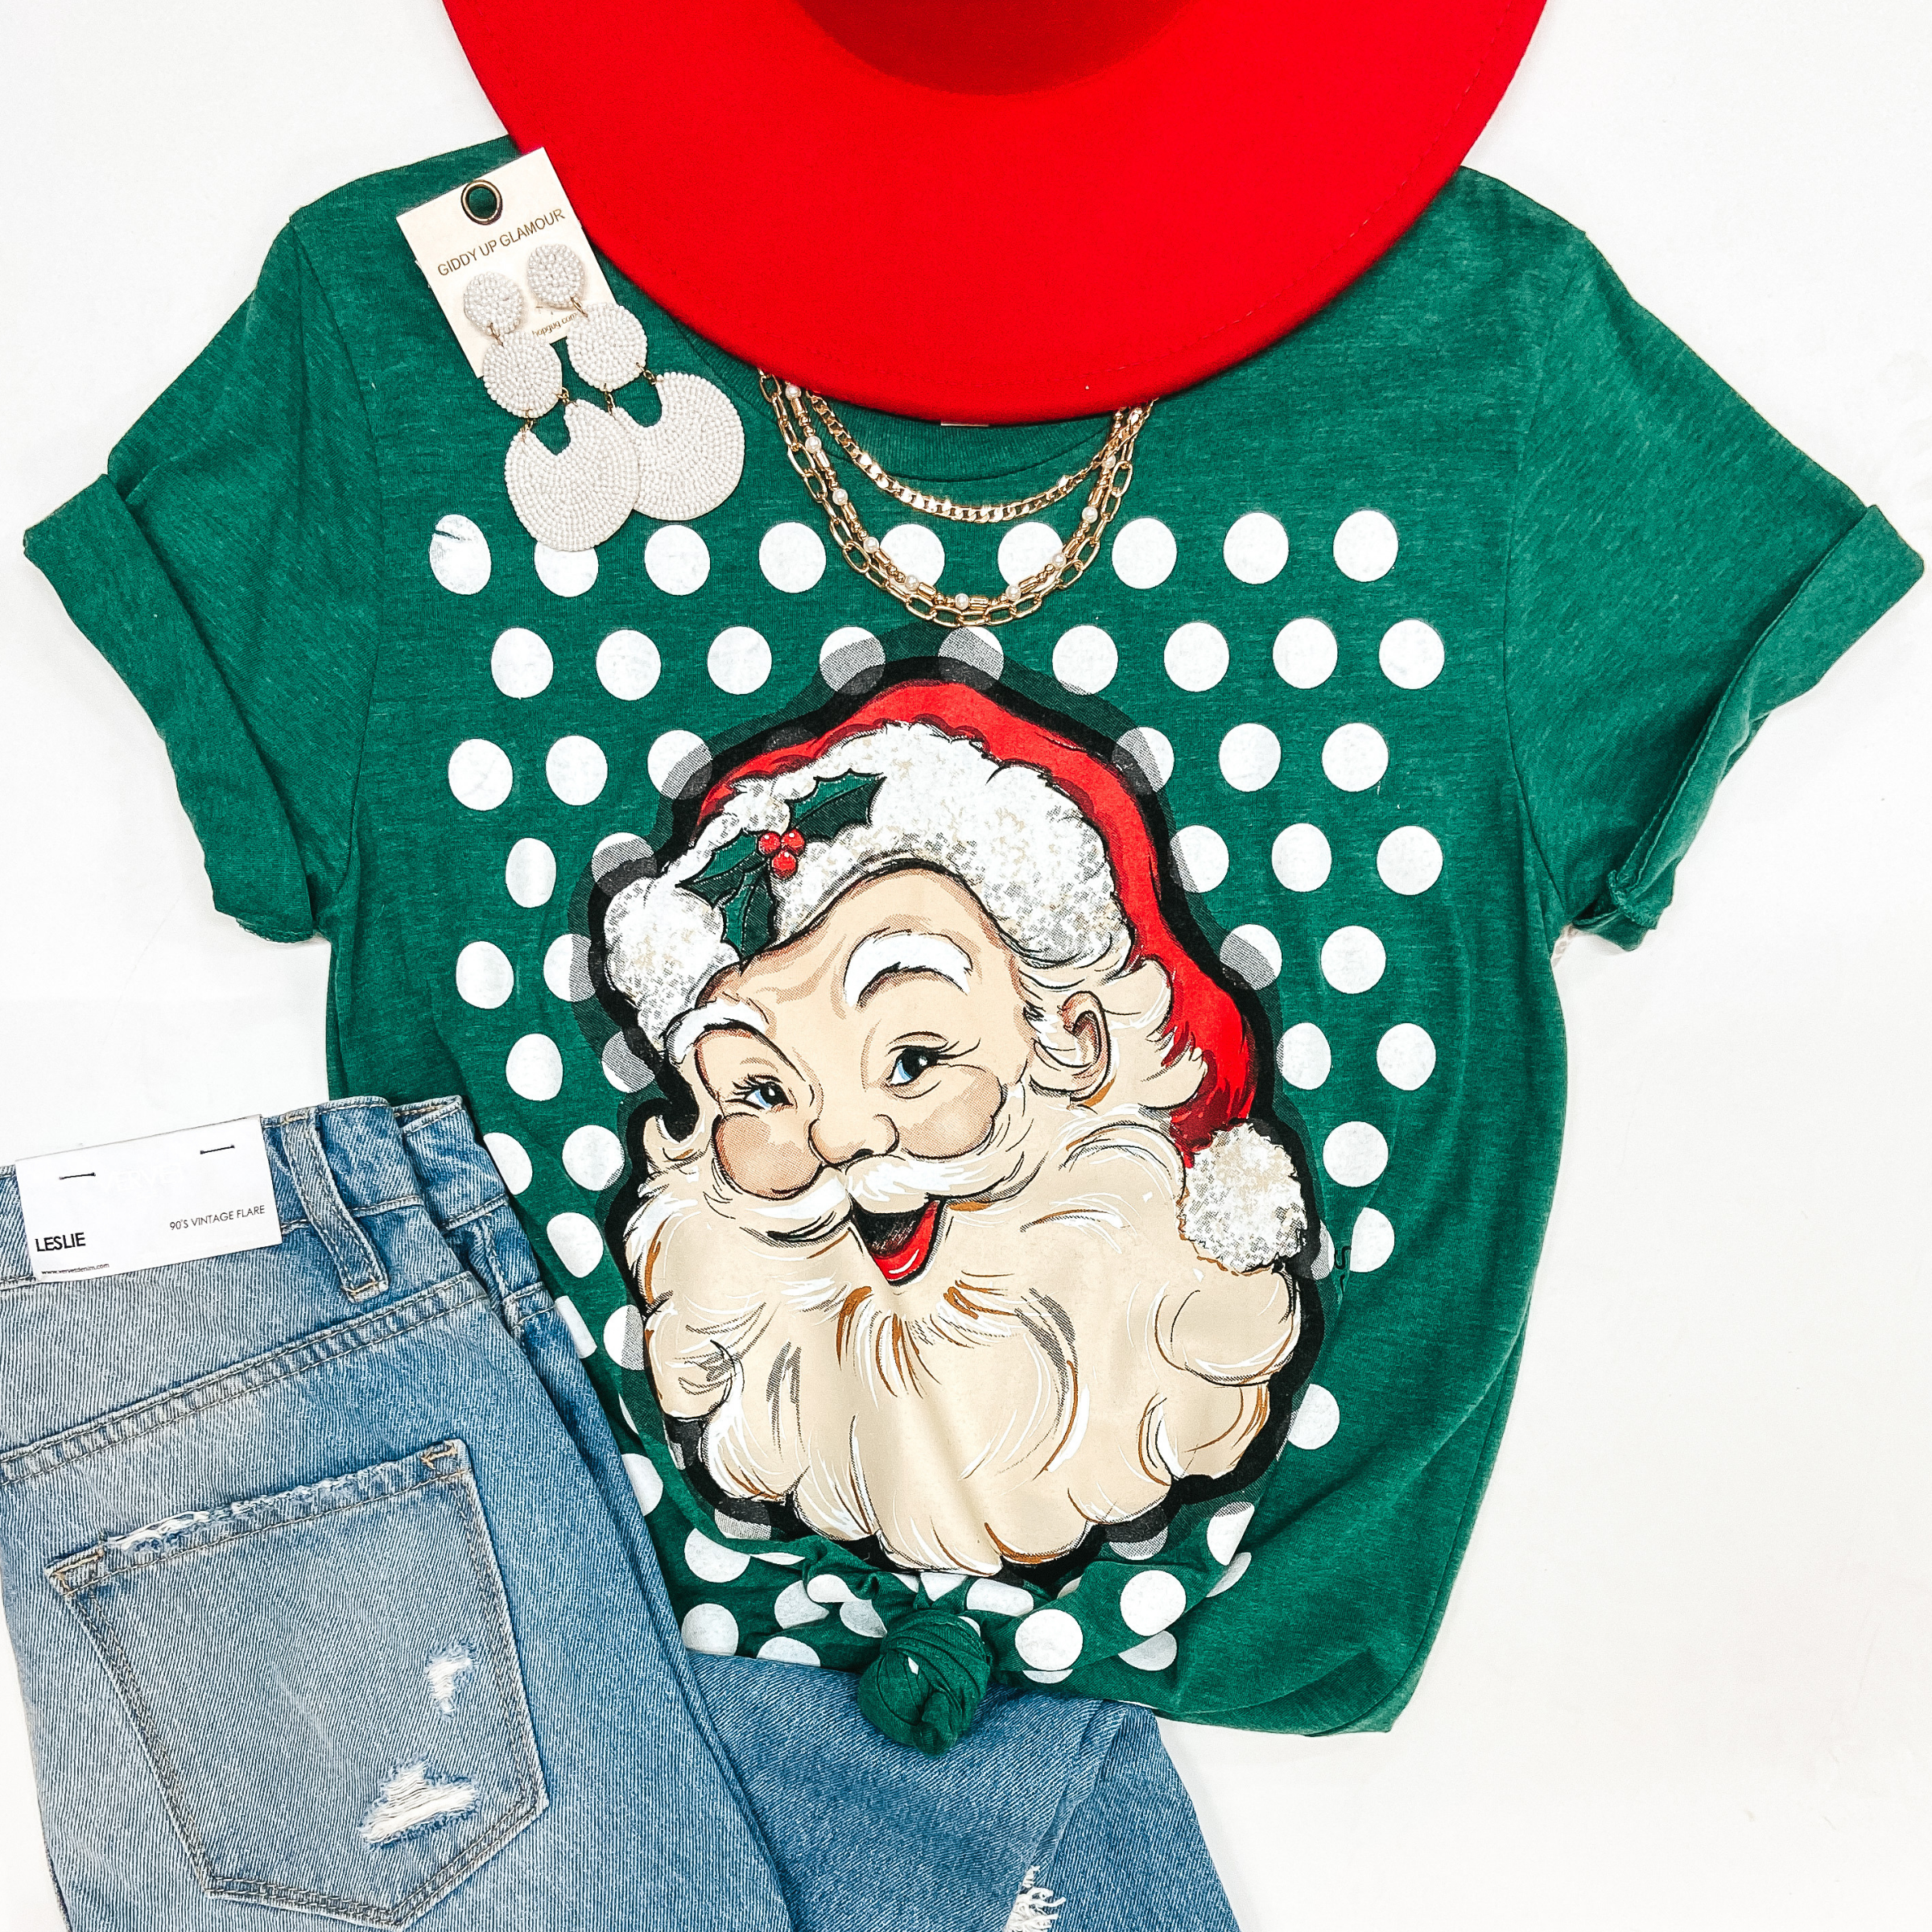 Vintage Santa Short Sleeve Graphic Tee with Polka Dots in Green - Giddy Up Glamour Boutique